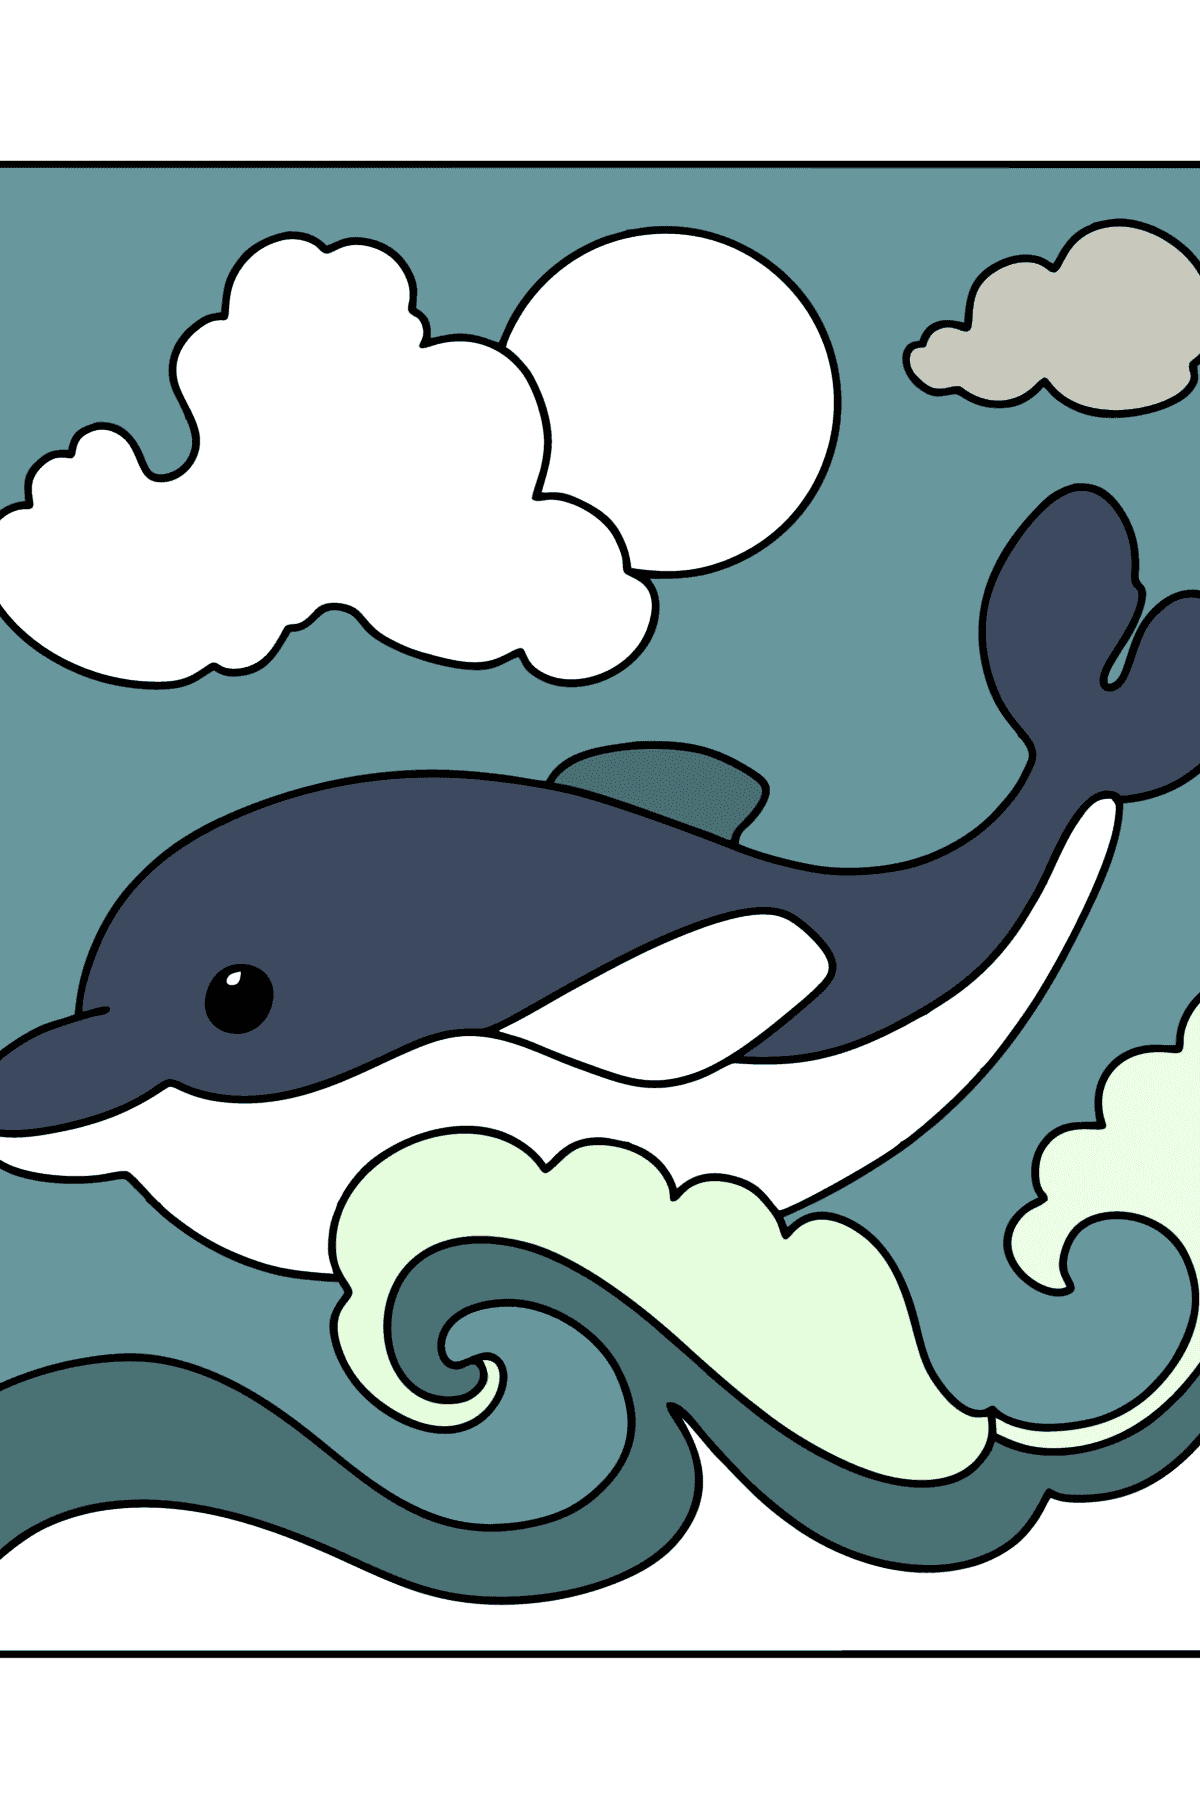 Dolphin on the Waves coloring page - Coloring Pages for Kids